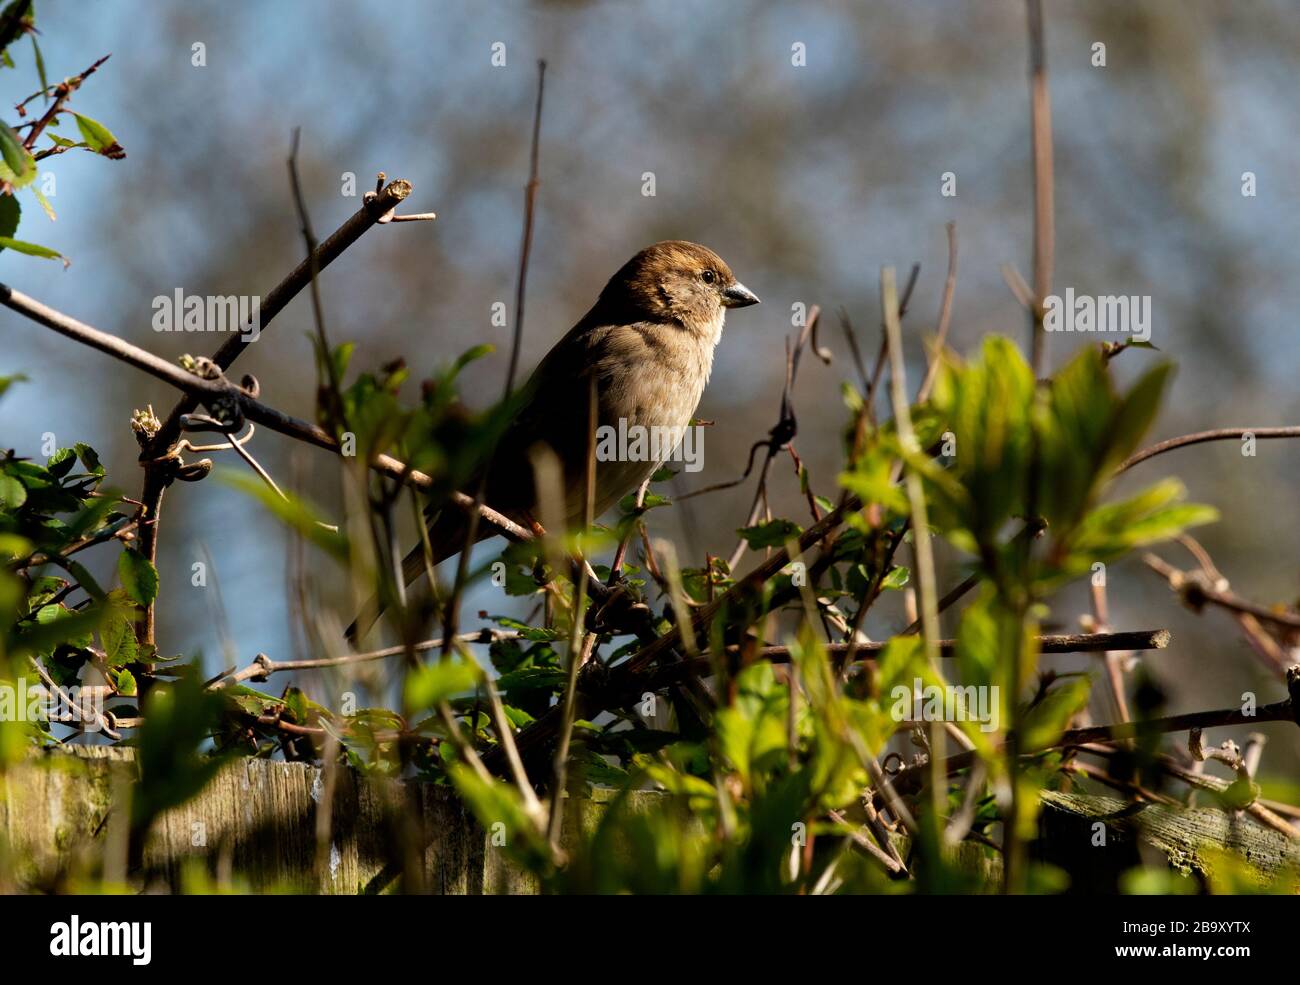 Thaxted, UK. 25th March, 2020. Thaxted, UK. 25th Mar, 2020.A house and garden on day three of lock down due to Coronavirus 25 March 2020 Hedge Sparrow Views of spring taken from a house and garden today as people self isolate due to Coronavirus warnings. Photograph Credit: BRIAN HARRIS/Alamy Live News Stock Photo